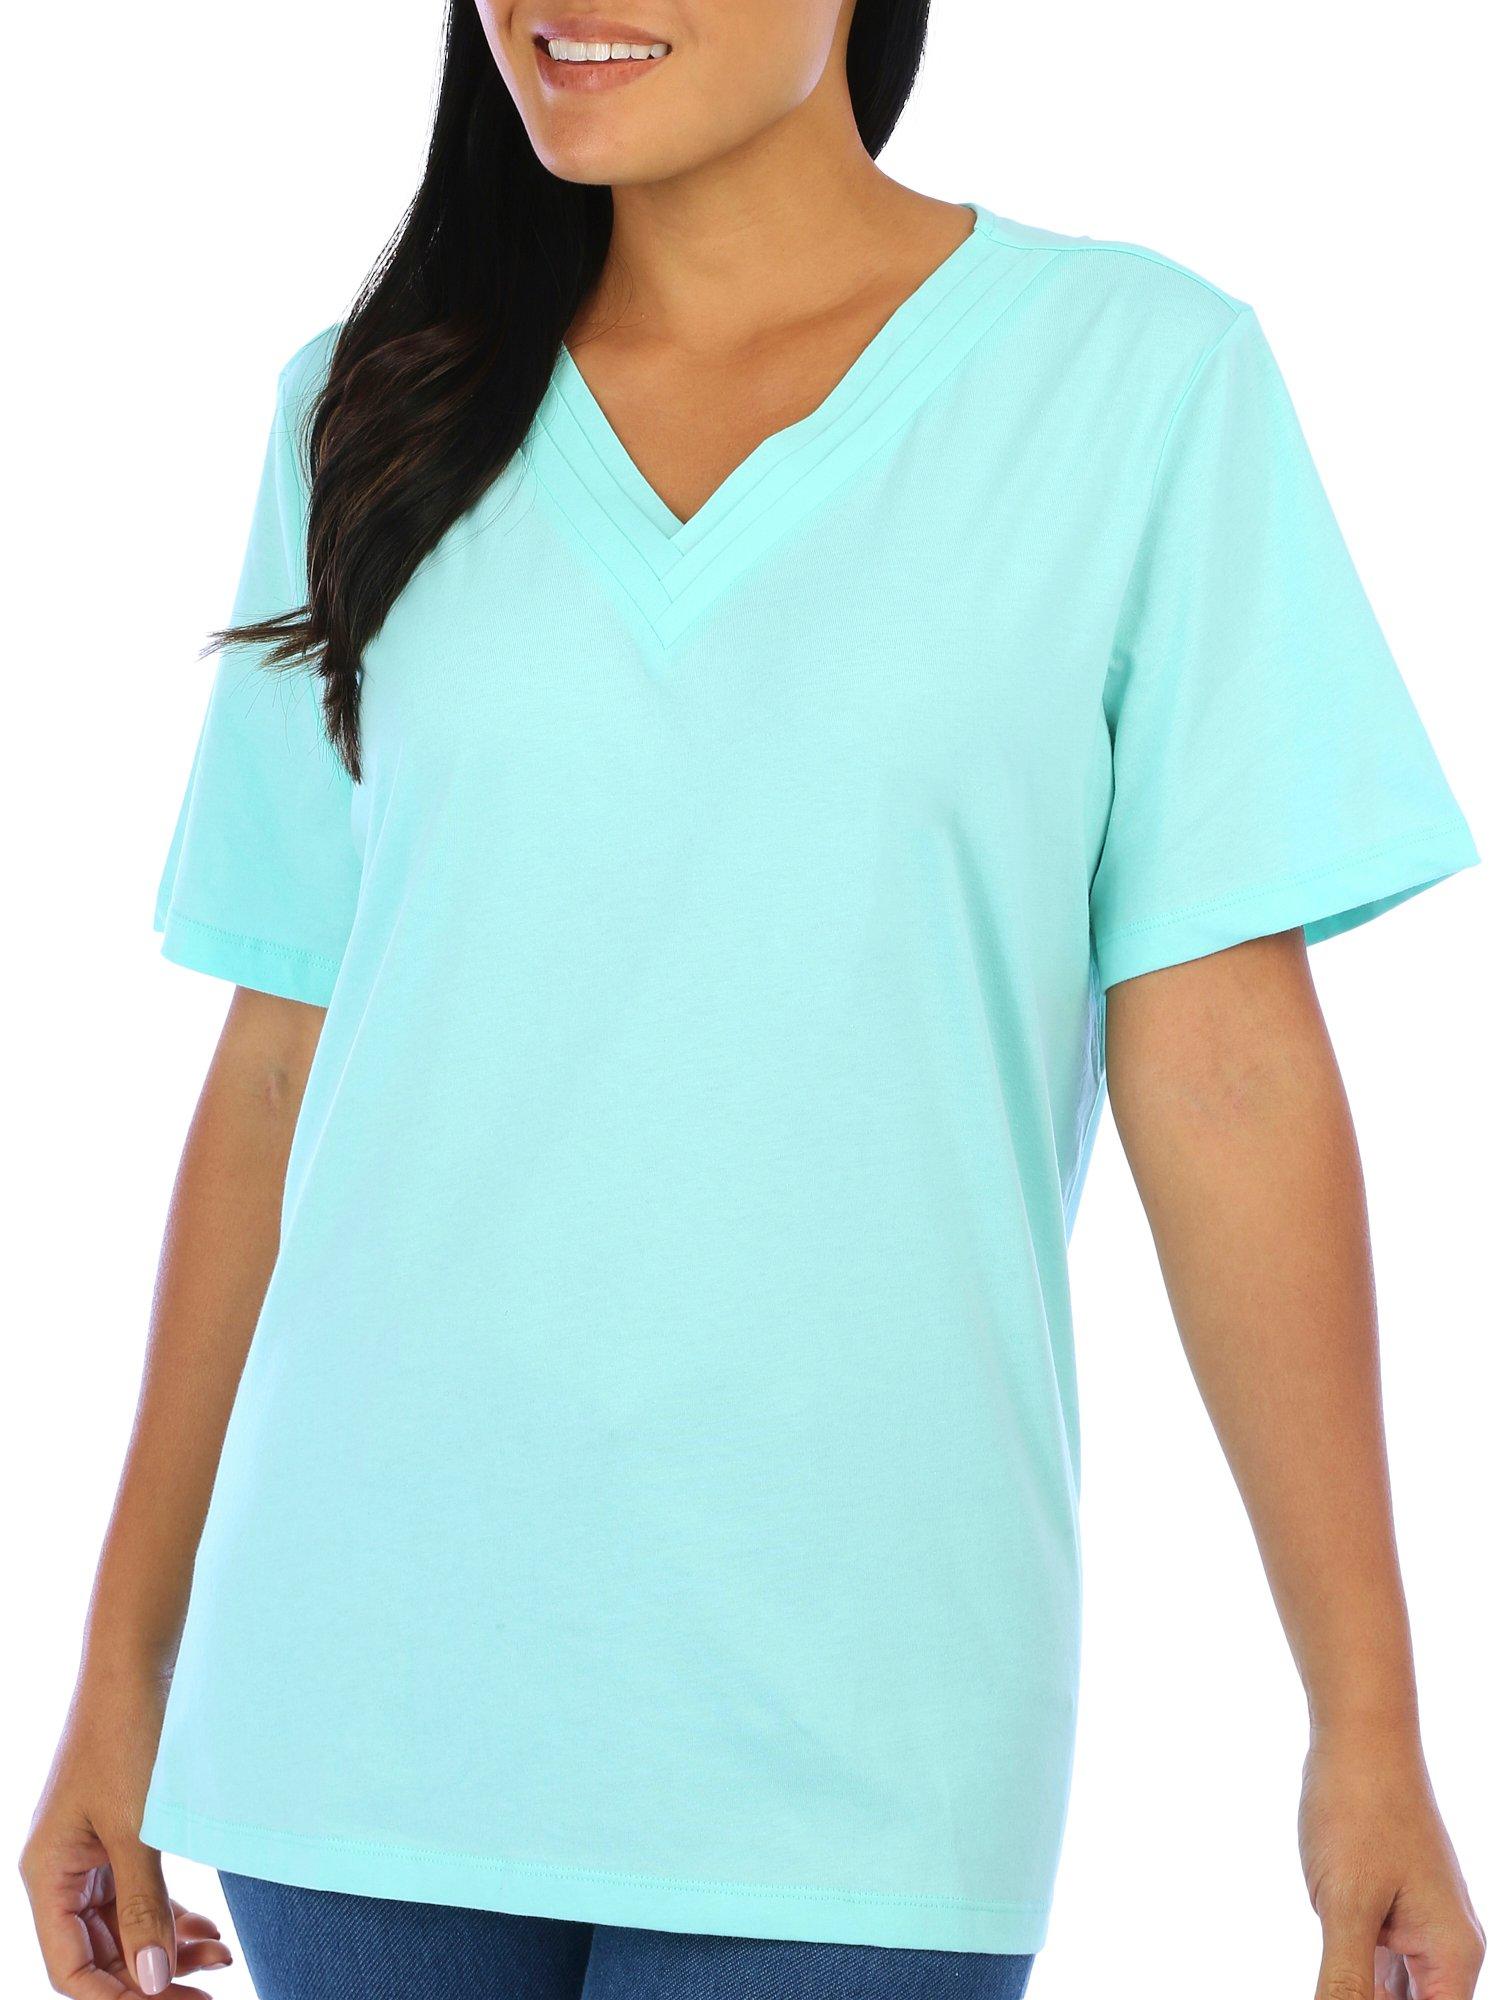 Coral Bay Petite Solid Triple V-Neck Short Sleeve Top